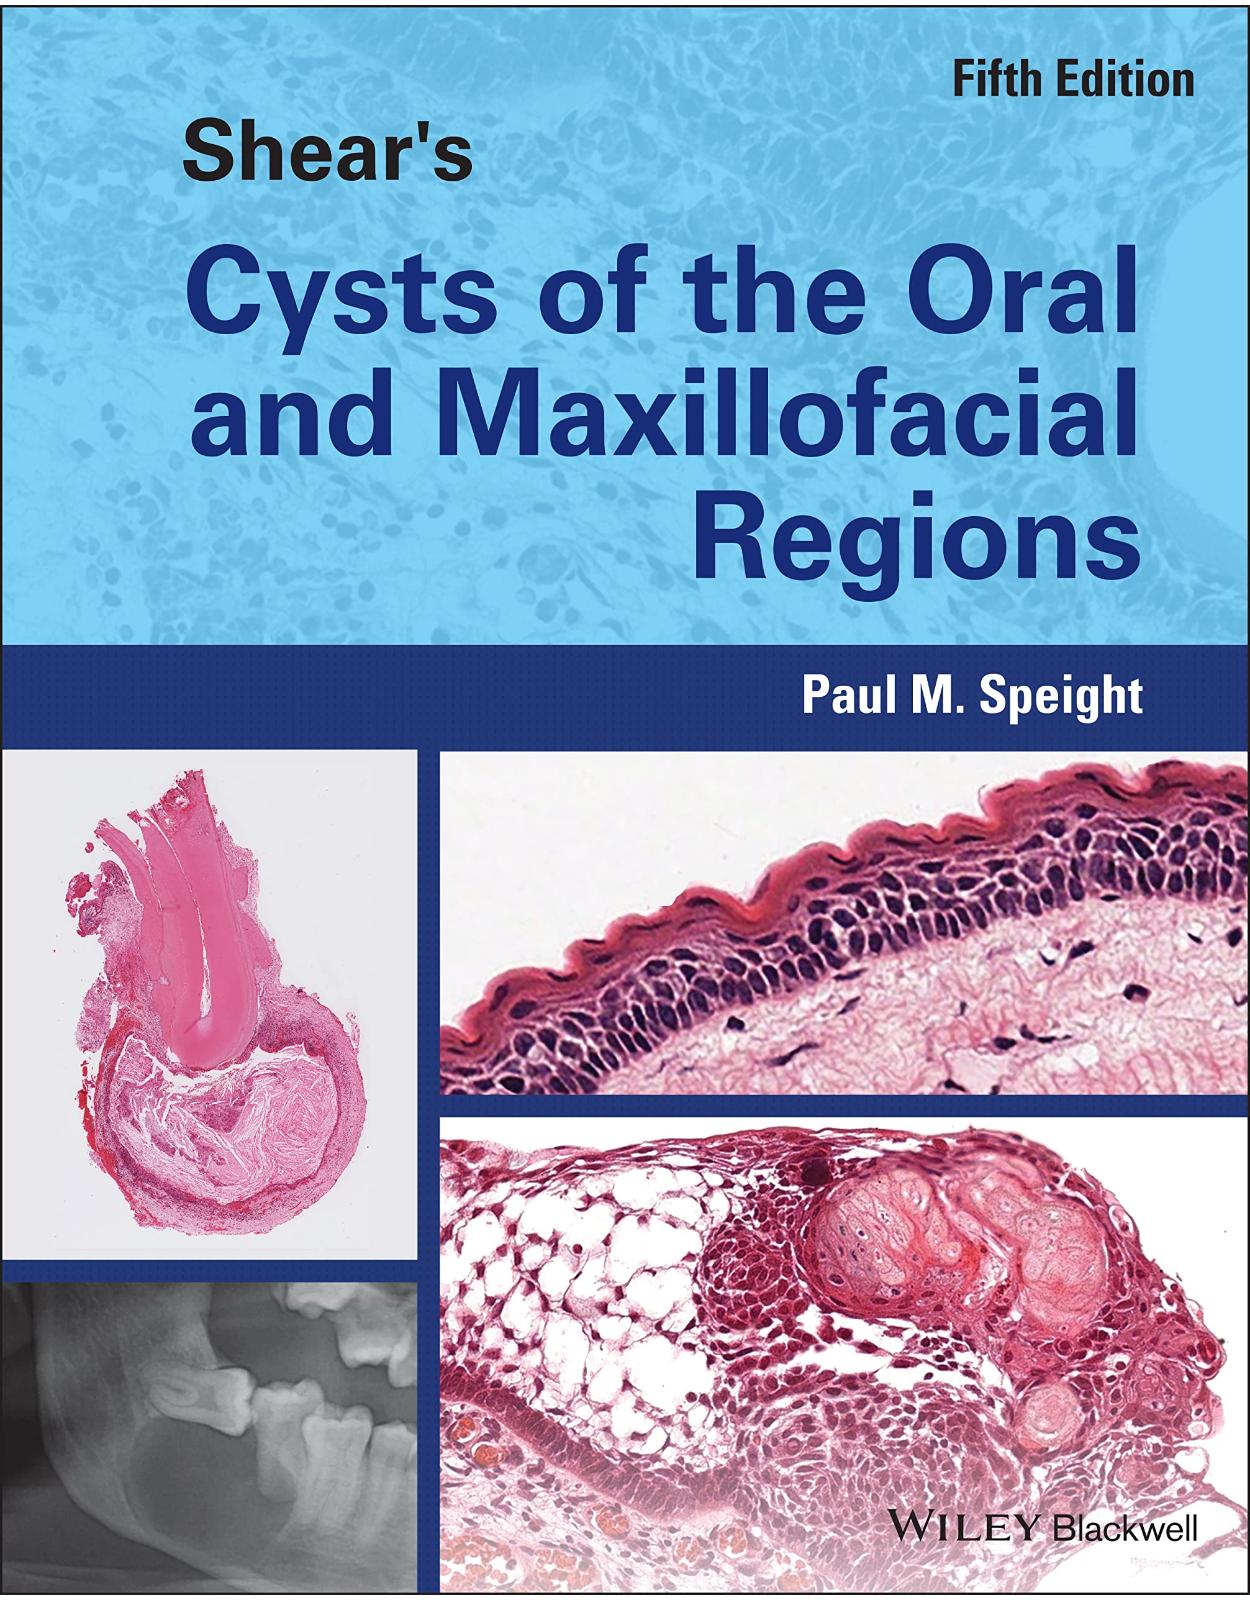 Shear′s Cysts of the Oral and Maxillofacial Region s 5th Edition